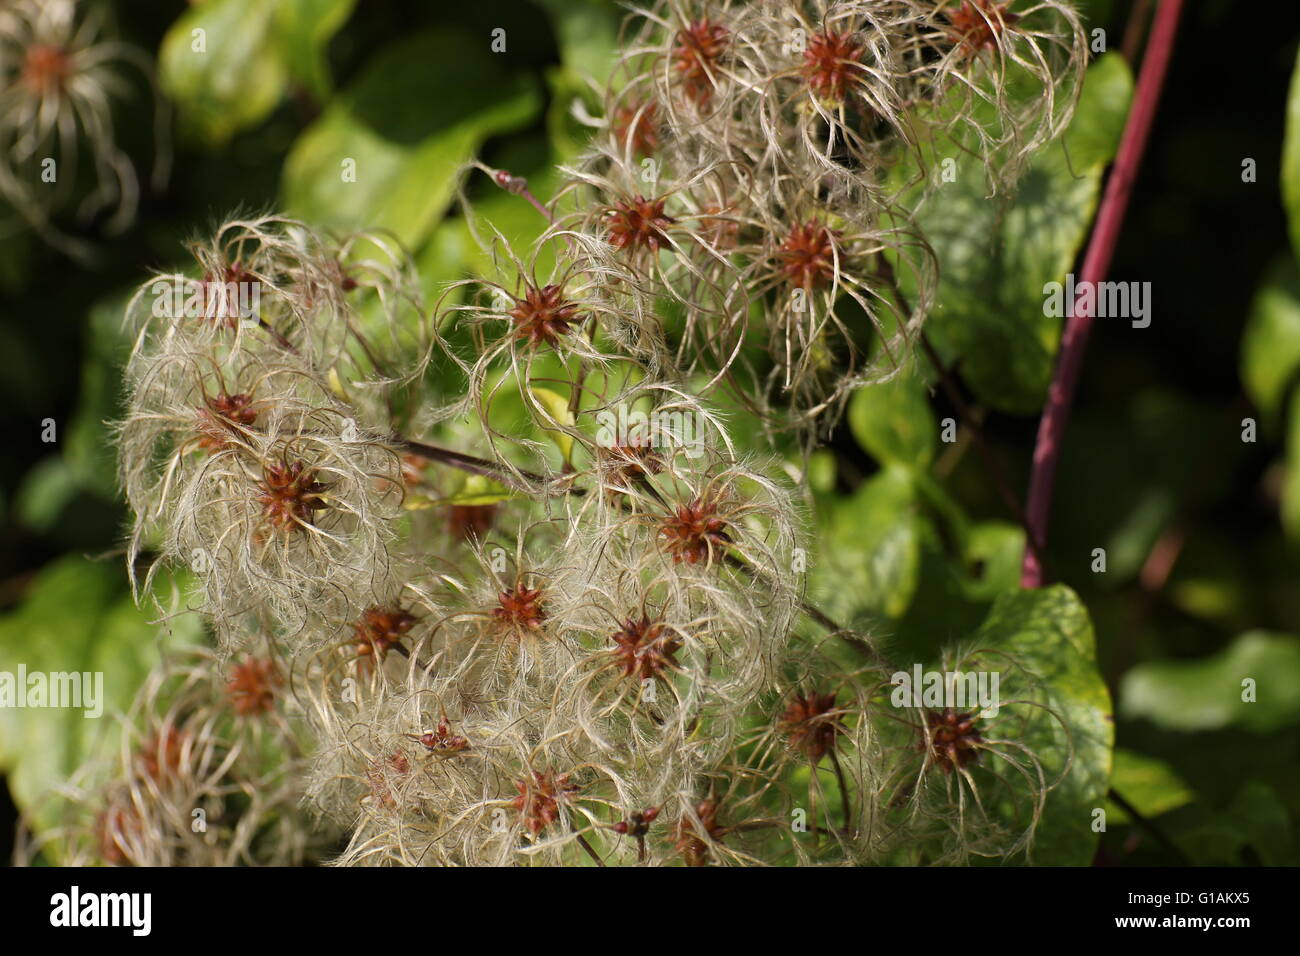 Fruits with silky appendages of the Traveller's Joy (Clematis vitalba). Stock Photo